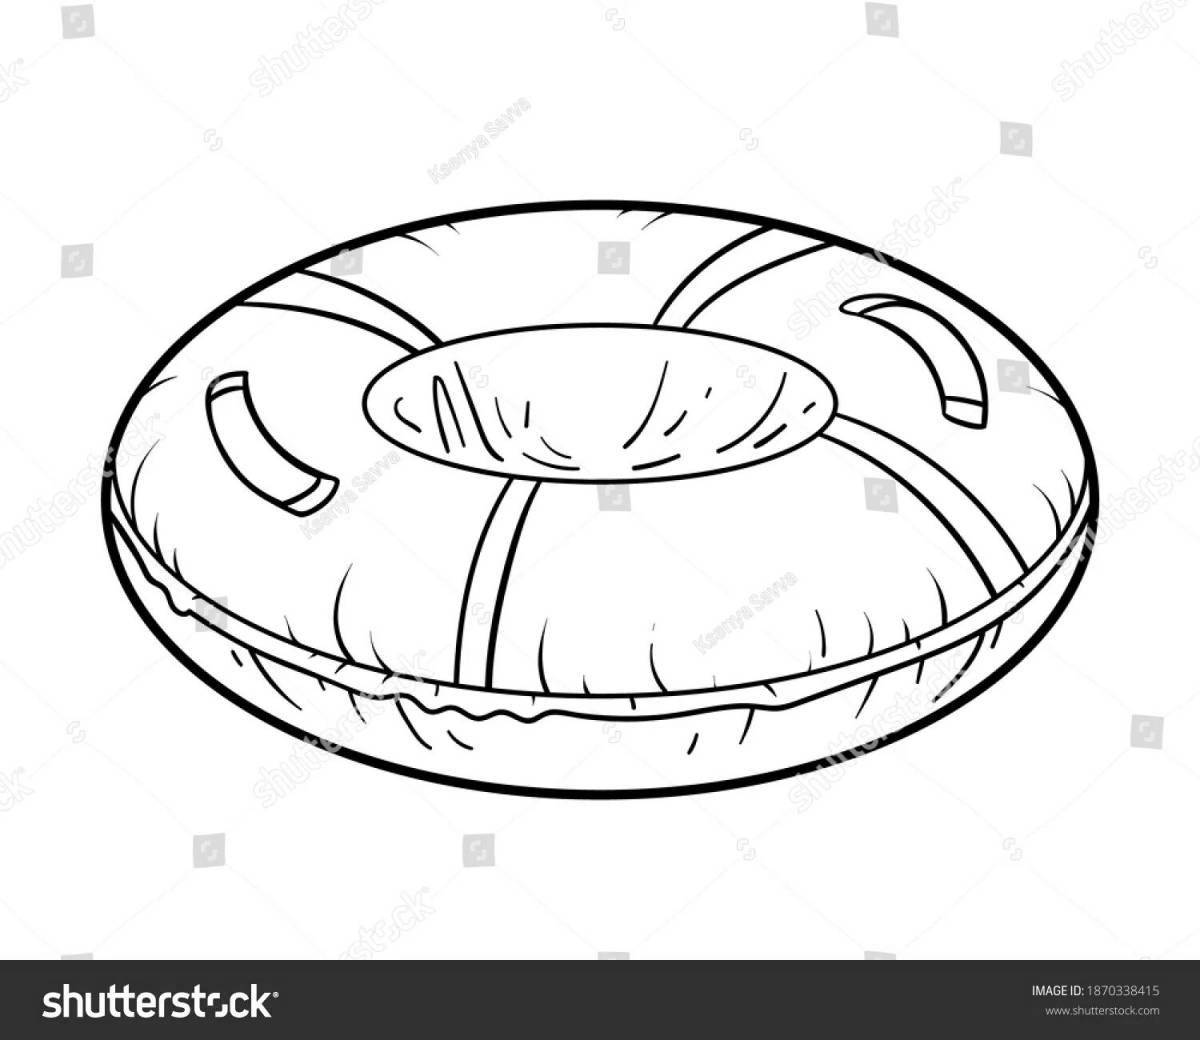 Living pipe coloring page